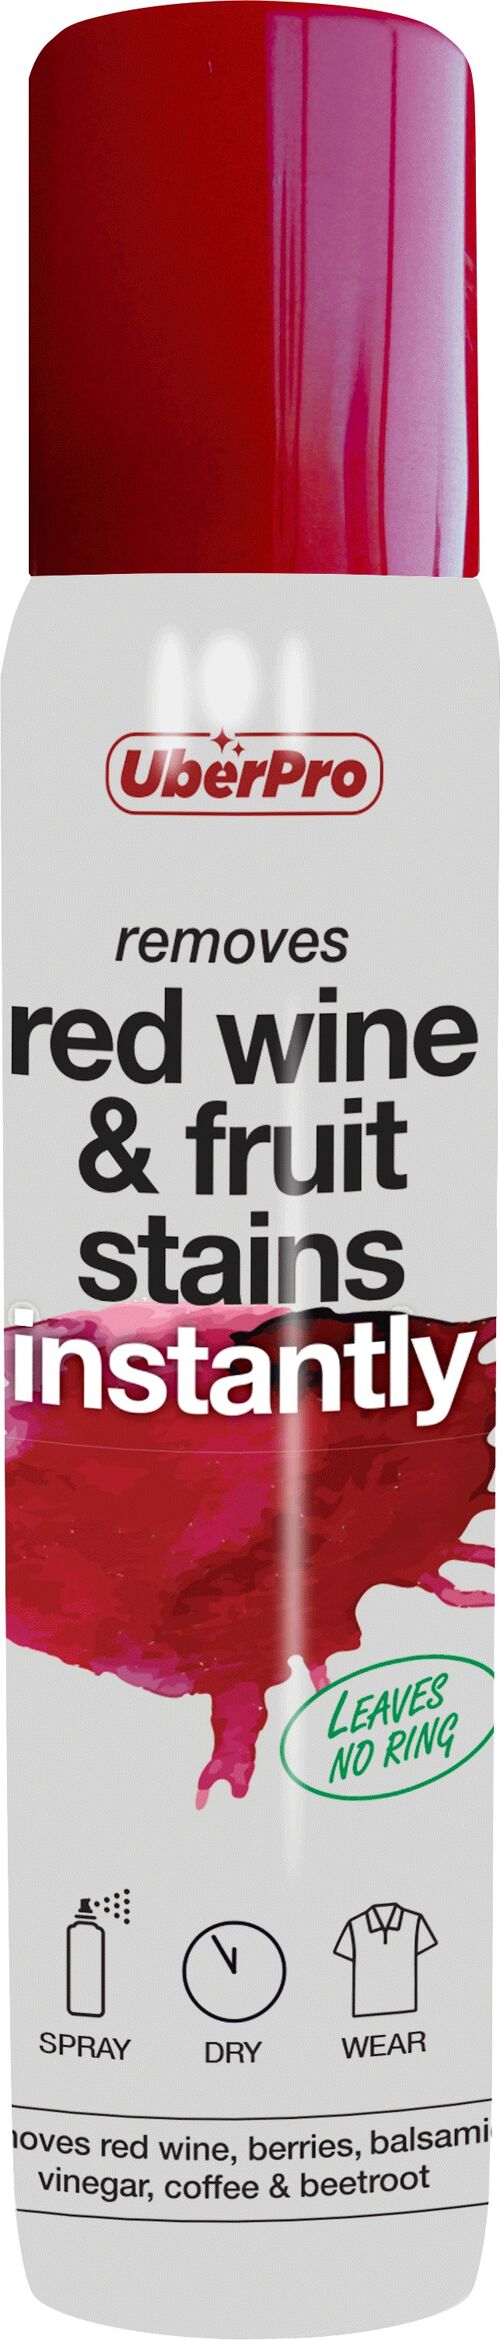 Red wine & fruit stain remover and Graffiti, ink & crayon remover 6000 units